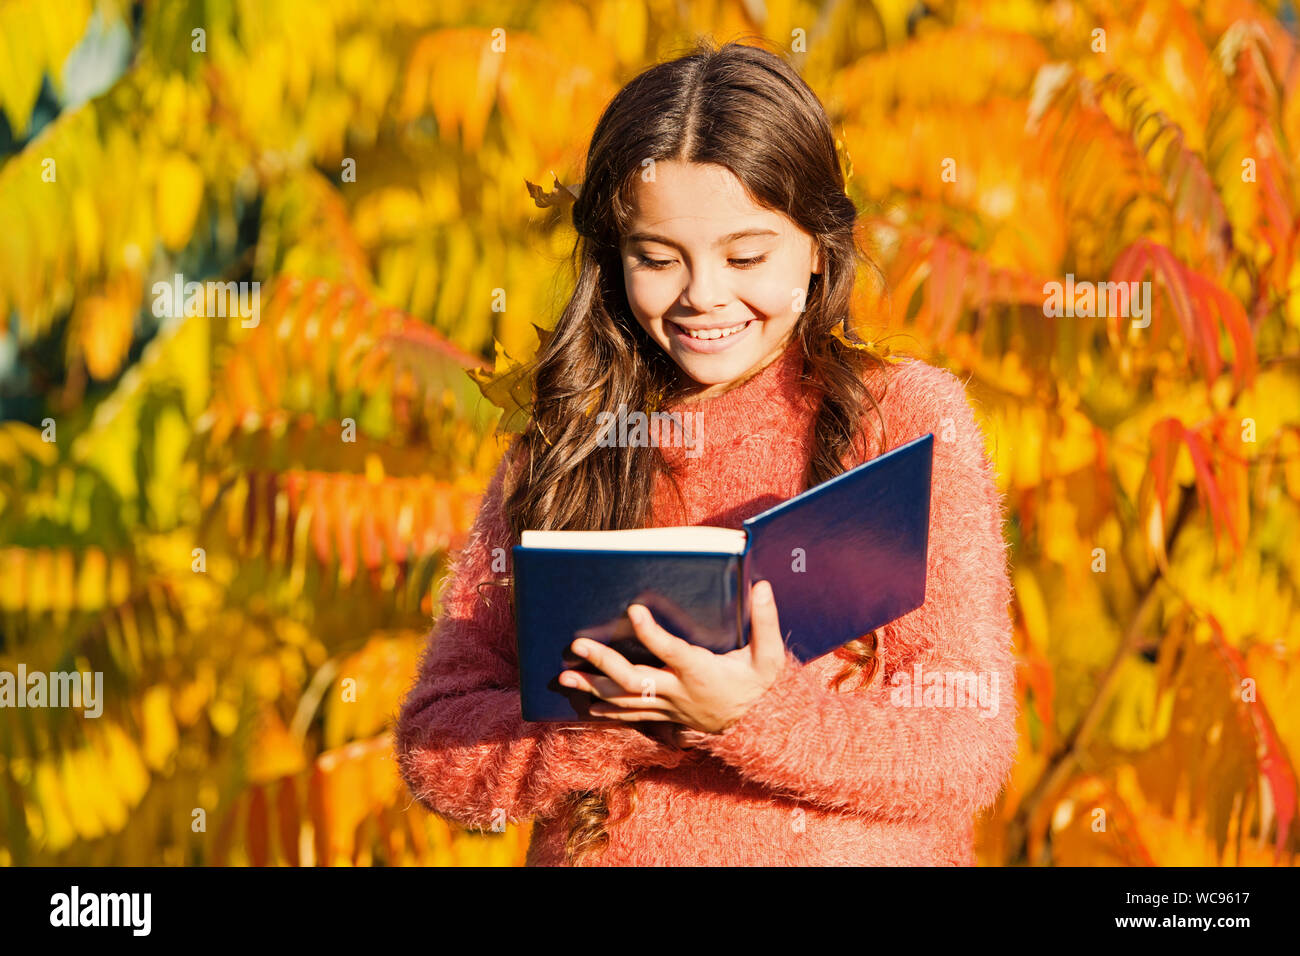 There is no end to education. Small child read book on autumn day. Small child enjoy reading on autumn landscape. Even little children looking at a picture book are using their imagination. Stock Photo